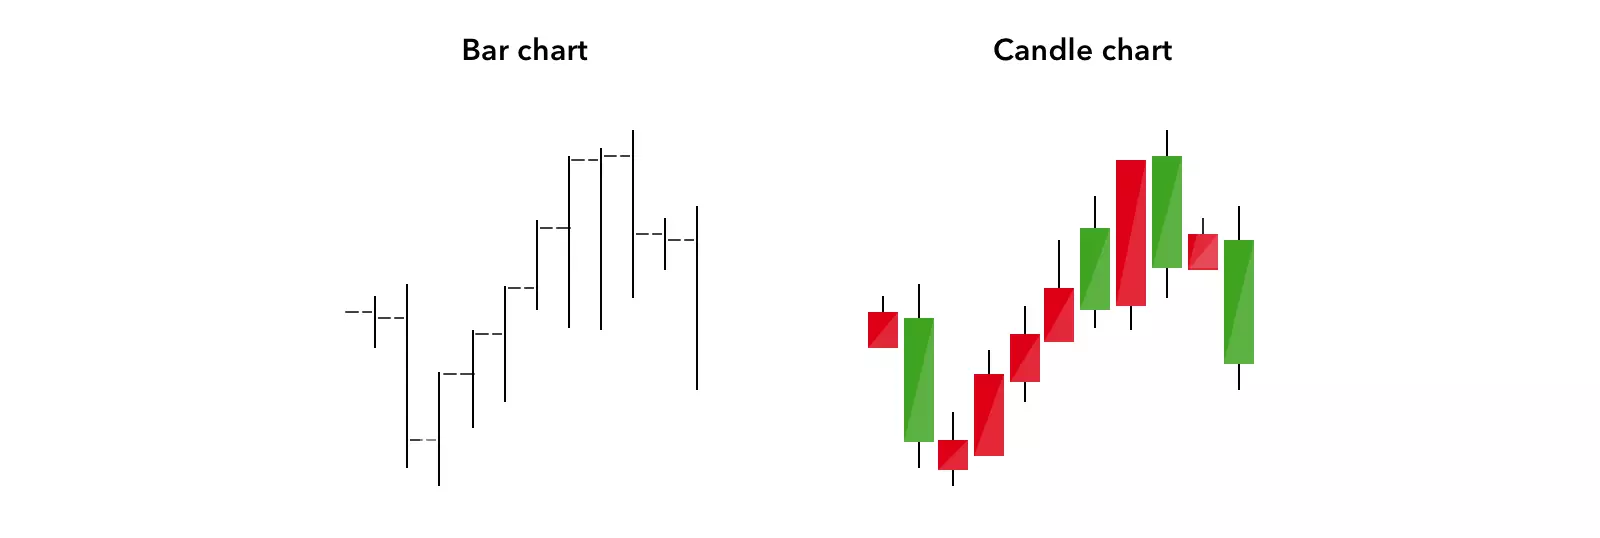 Bar and candle chart